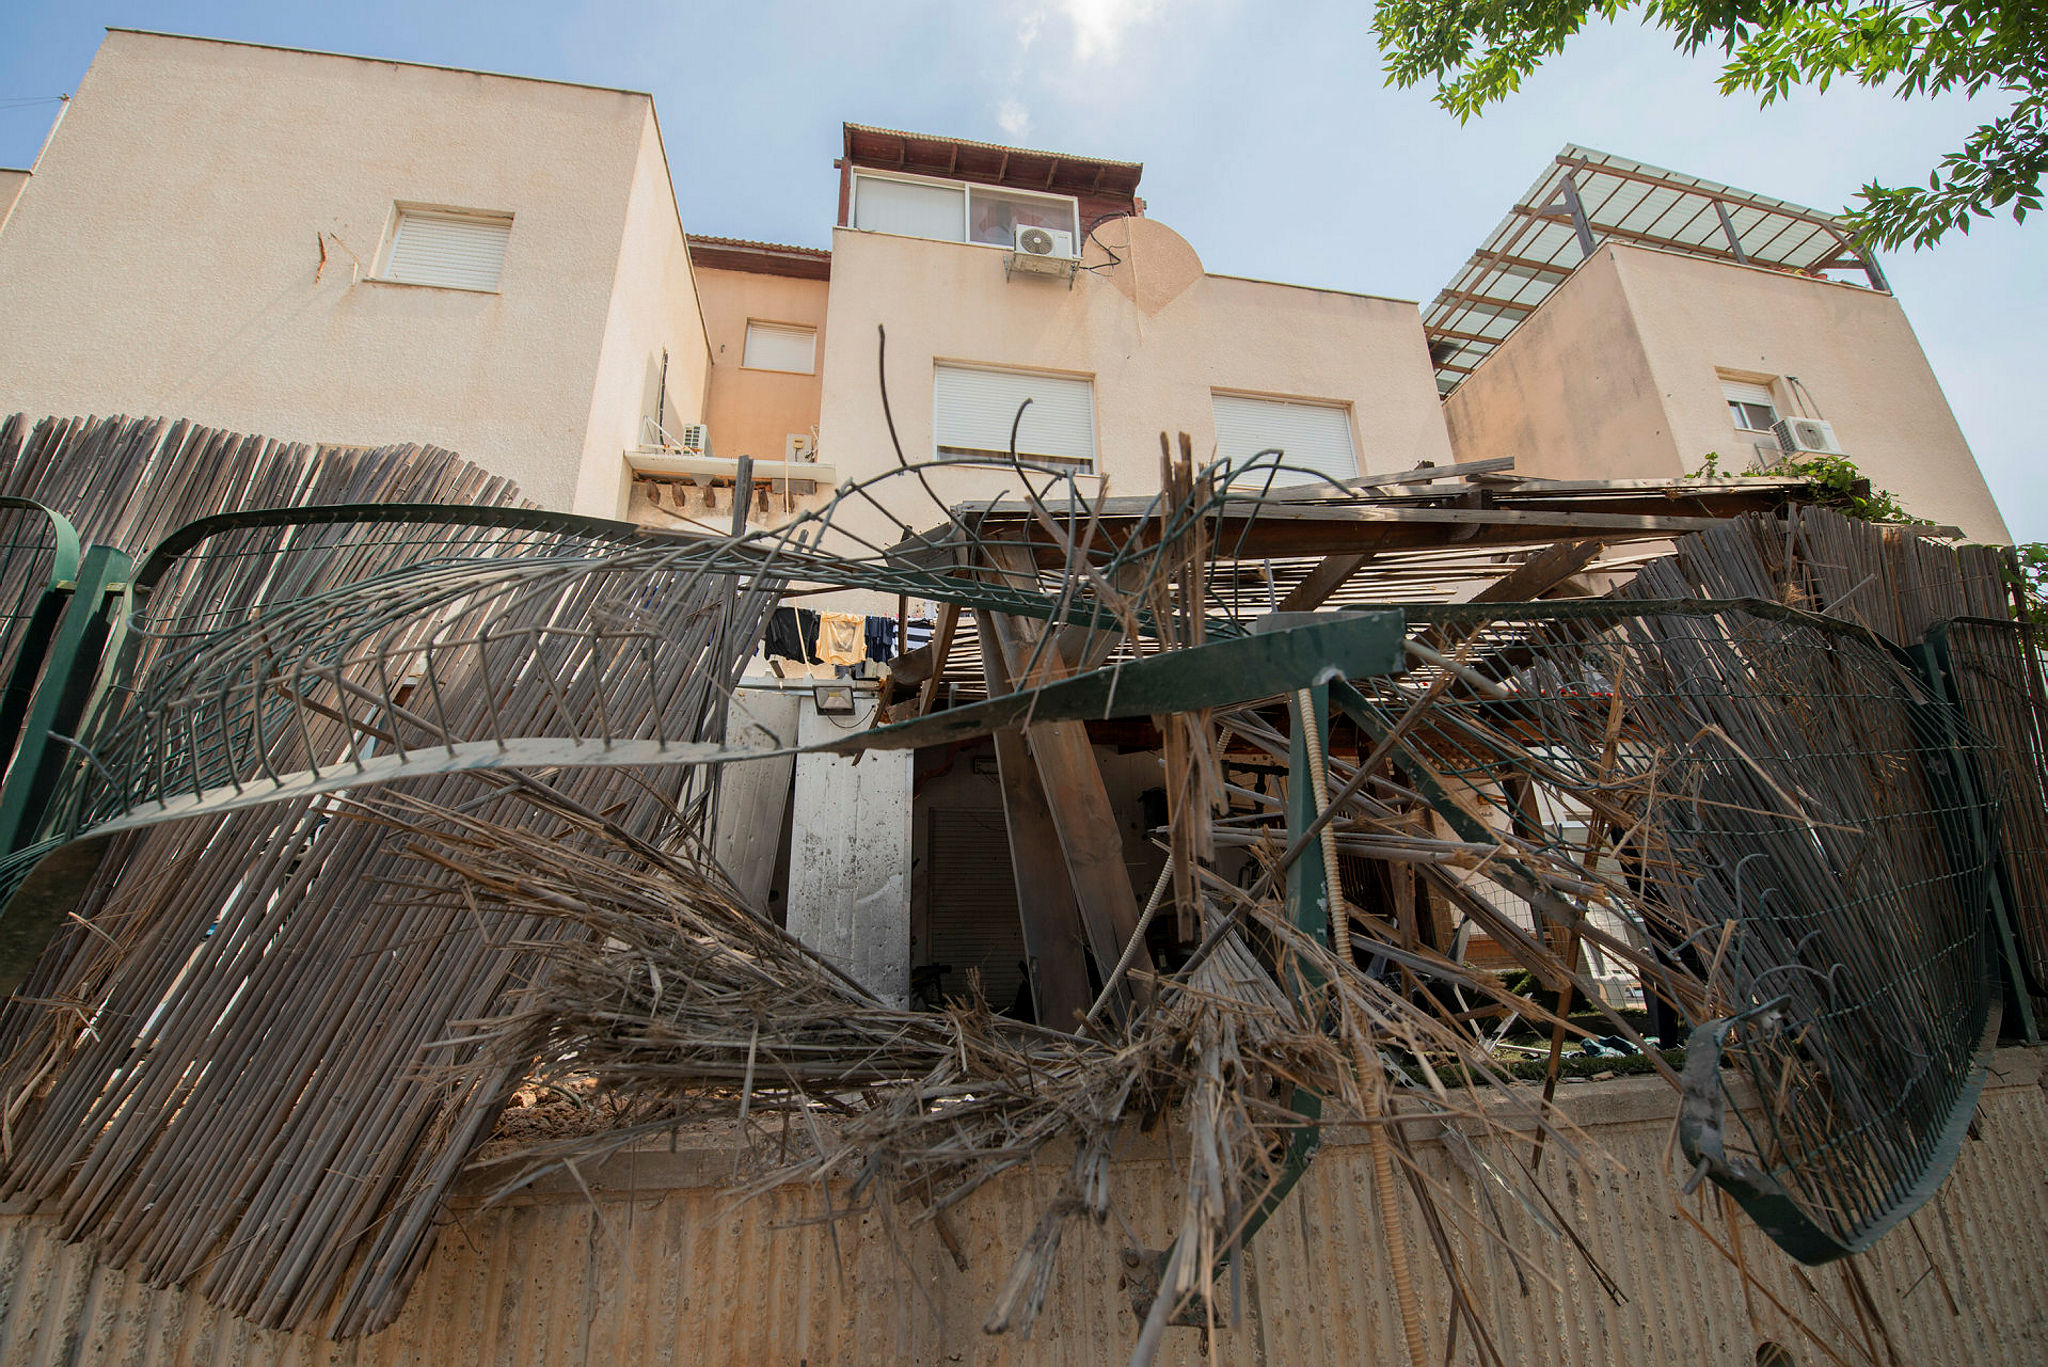 A rocket launched from Gaza causing damages to property